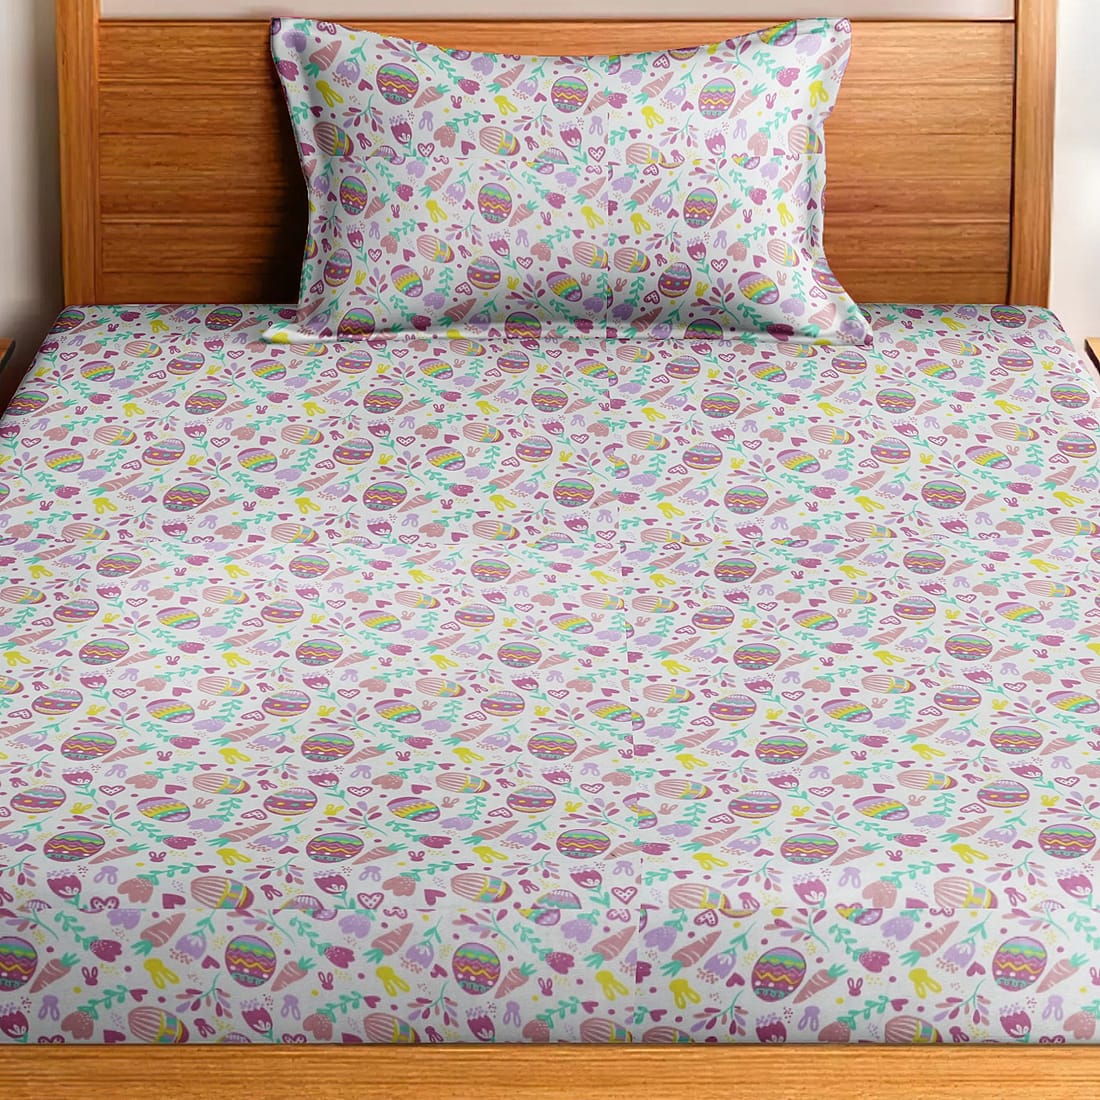 Soft Cotton Digital Print Single Fitted Bedsheet For Kids In Magenta